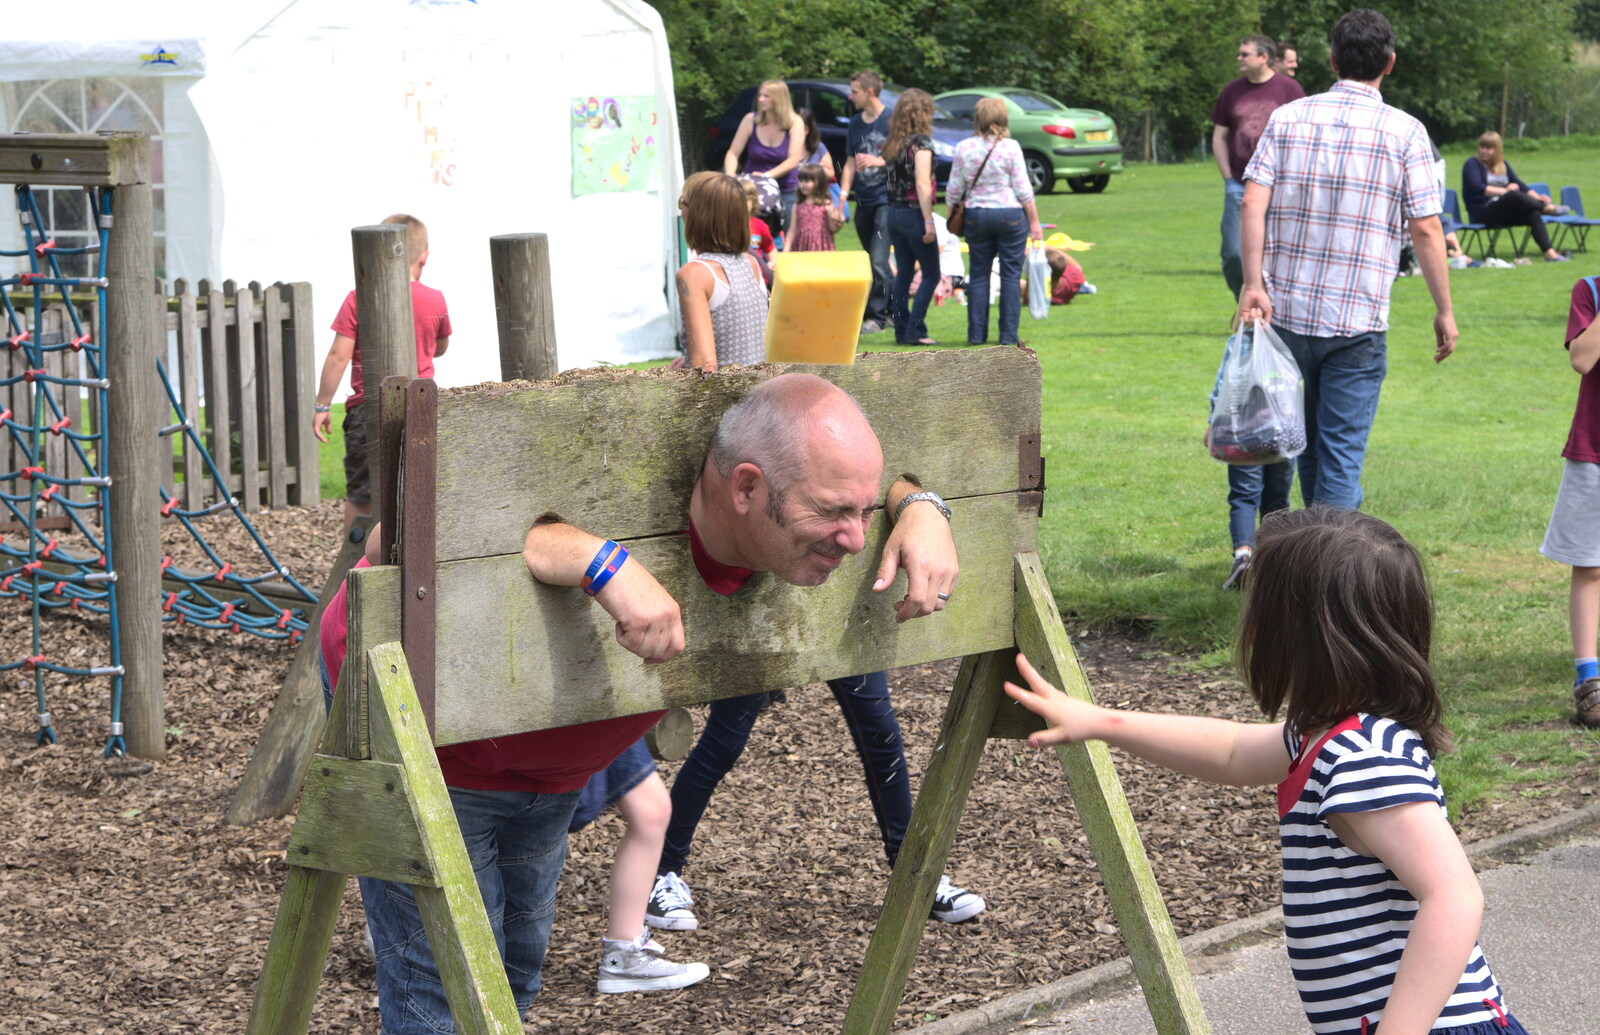 Mr Beckley the caretaker is in the stocks from St. Peter and St. Paul's School Summer Fete, Eye, Suffolk - 12th July 2014